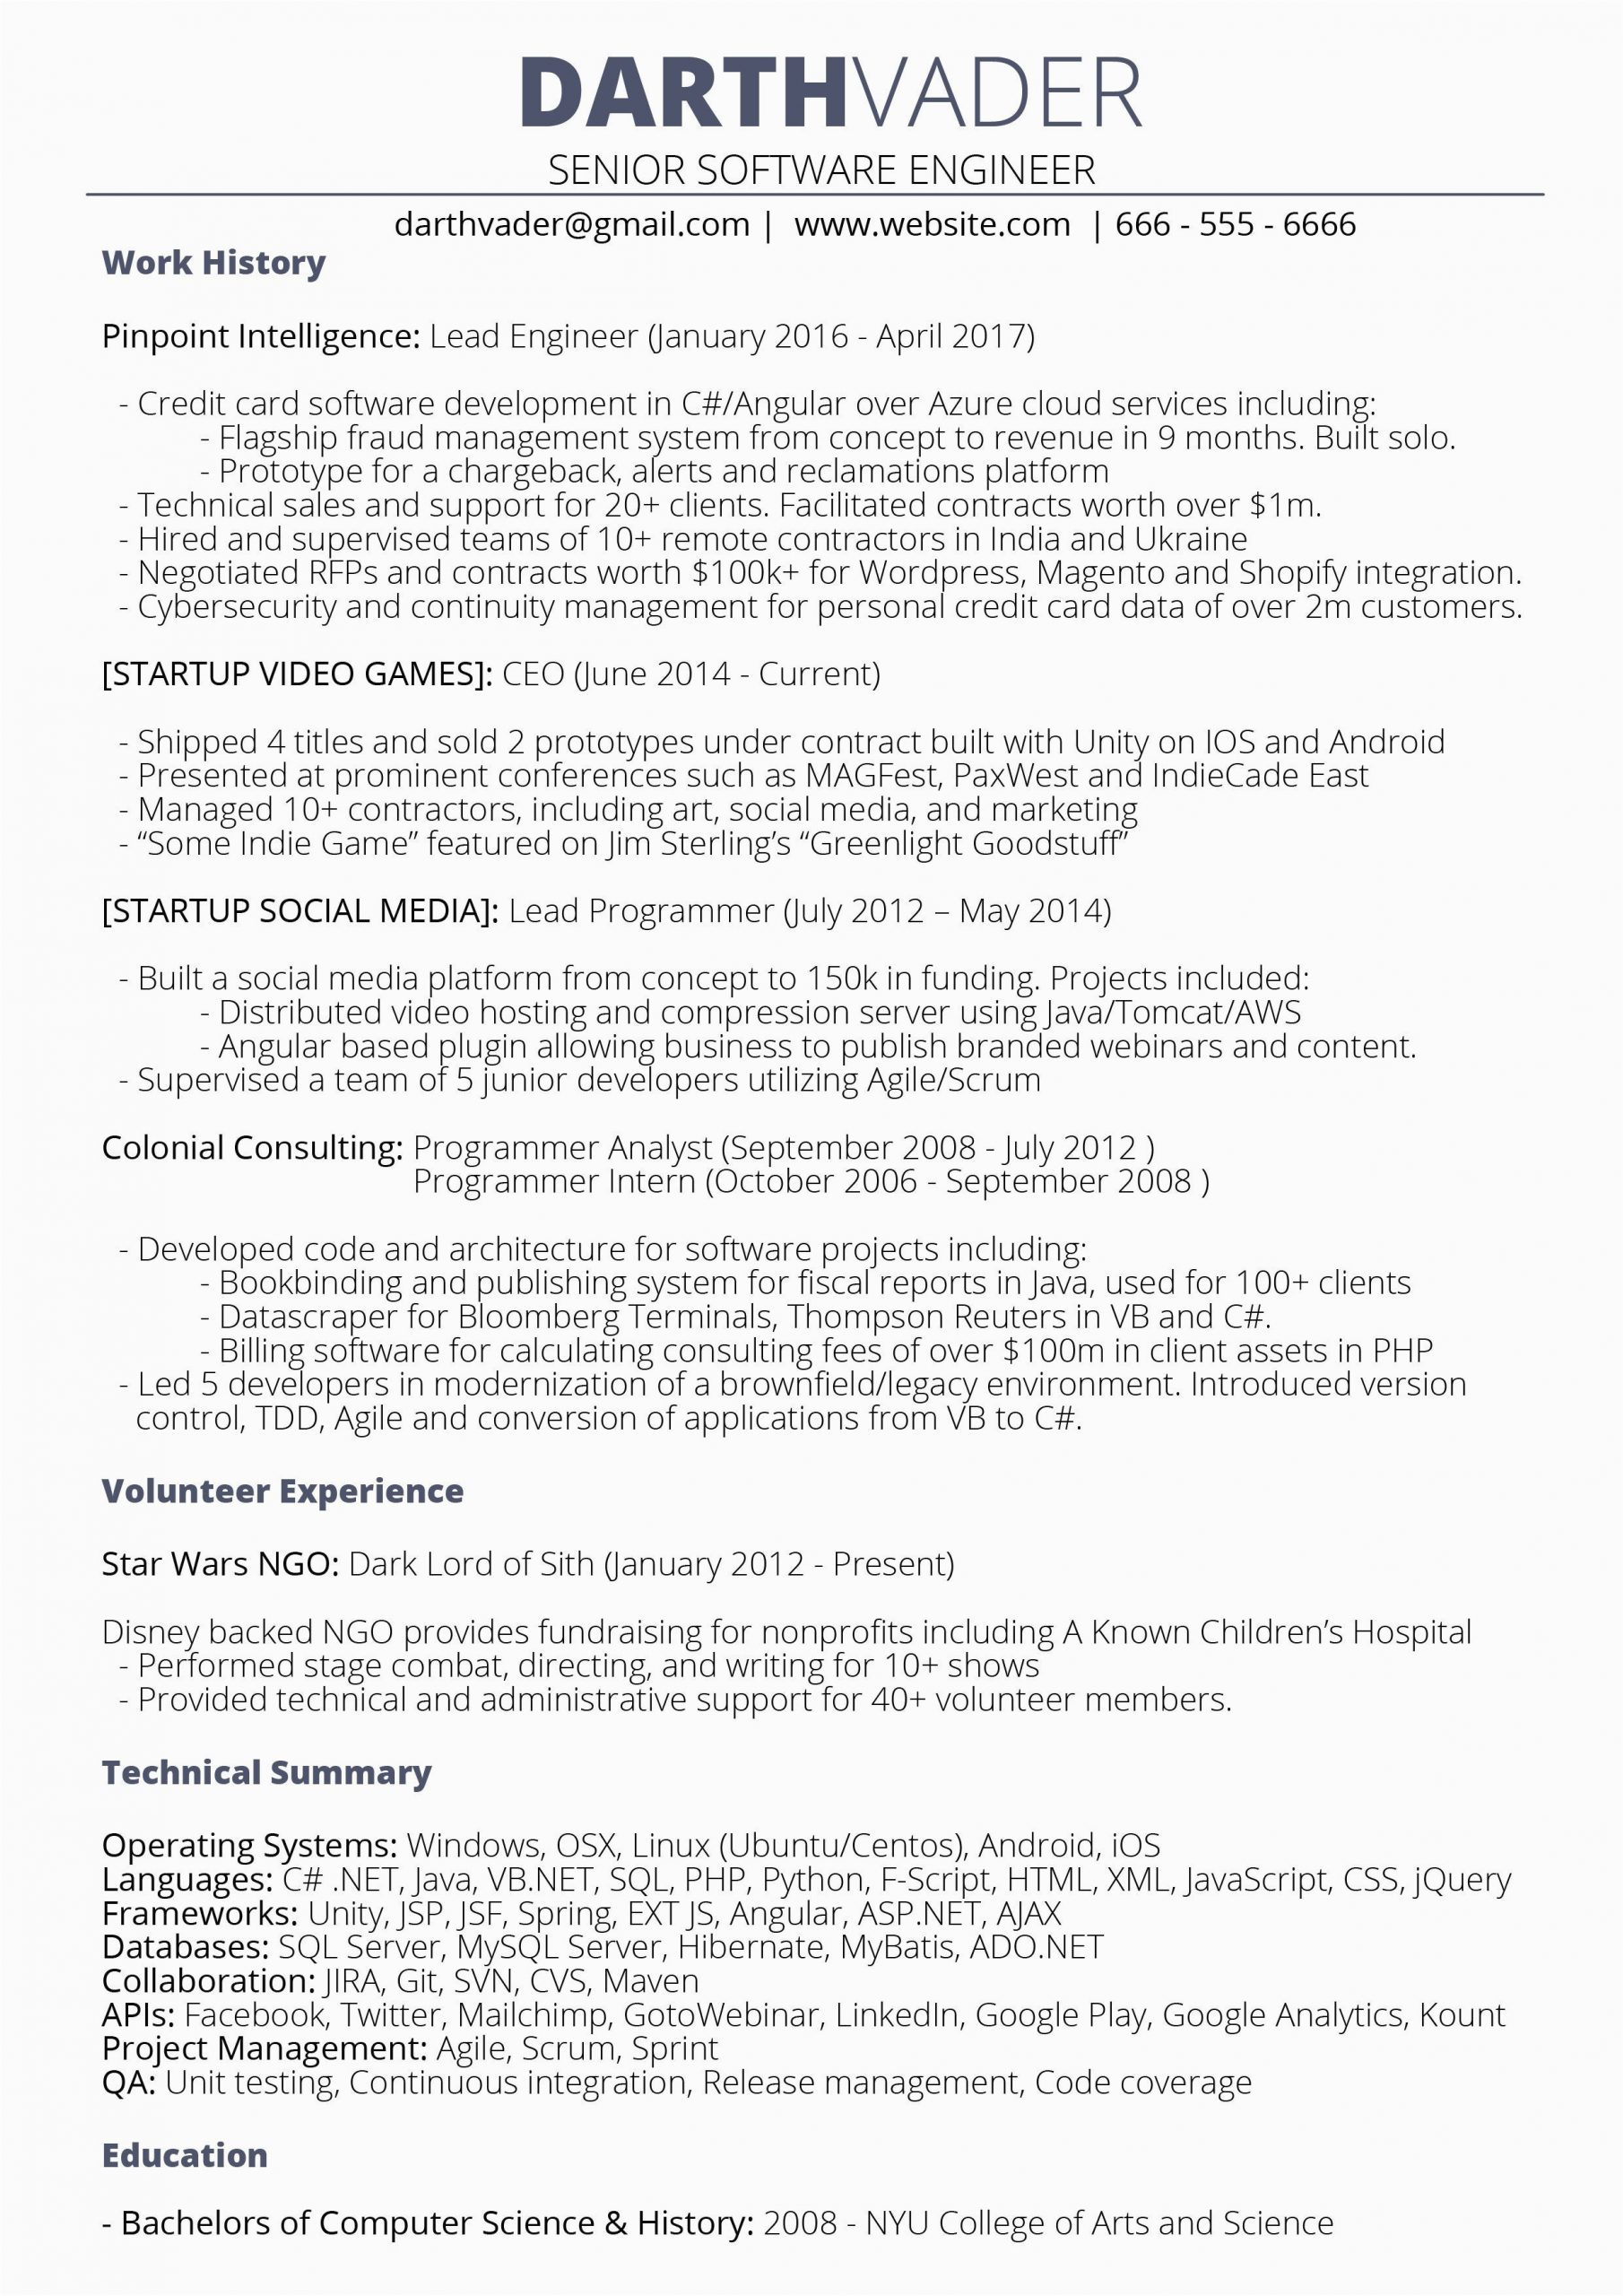 Sample Resume for software Engineer with 10 Years Experience Senior software Engineer 10 Yrs Looking for Critique